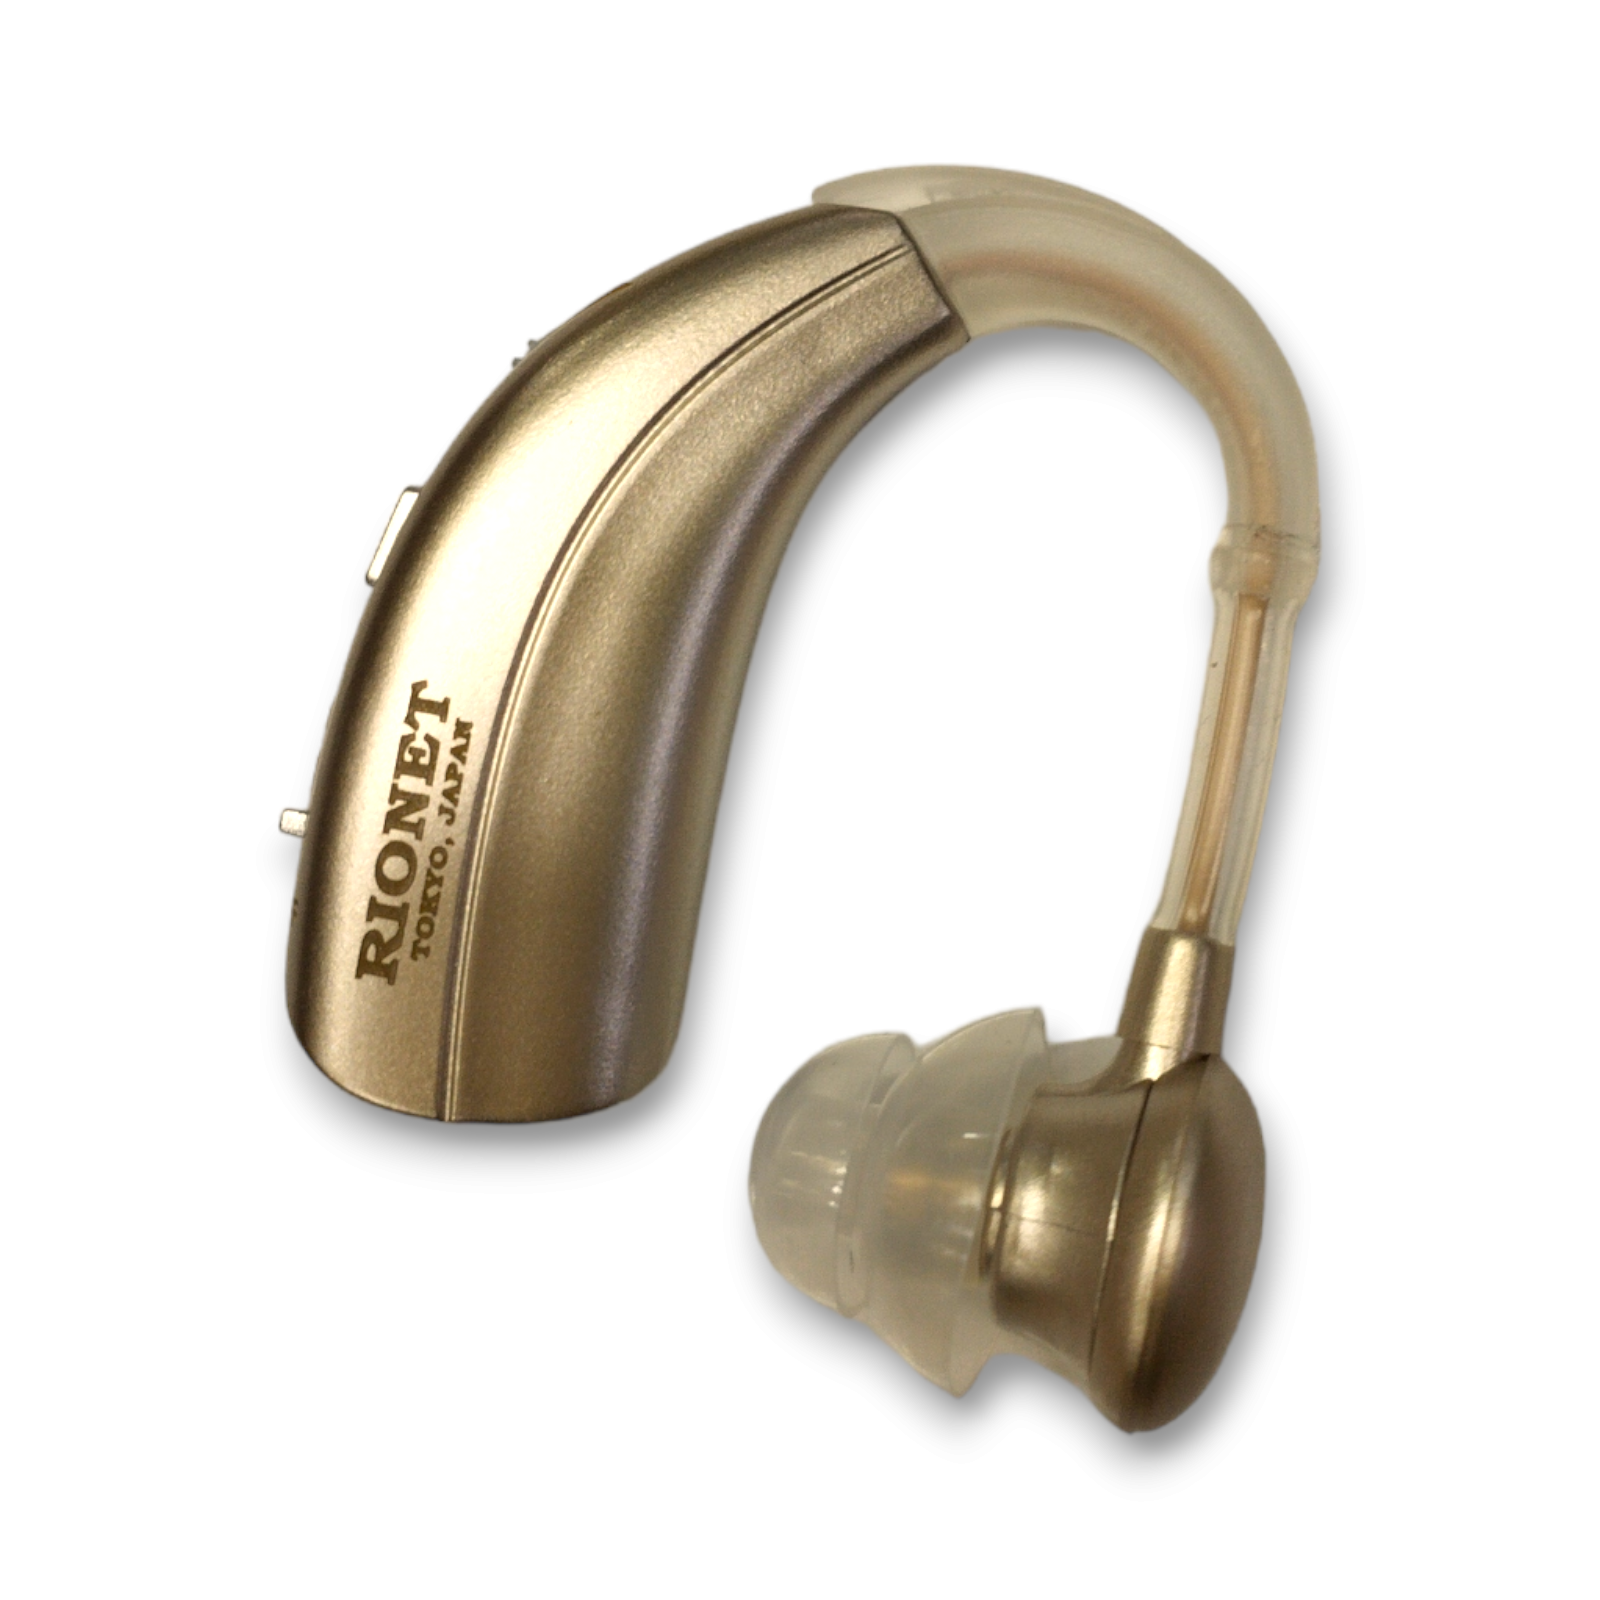 RIONET BTE Rechargeable Hearing Aid